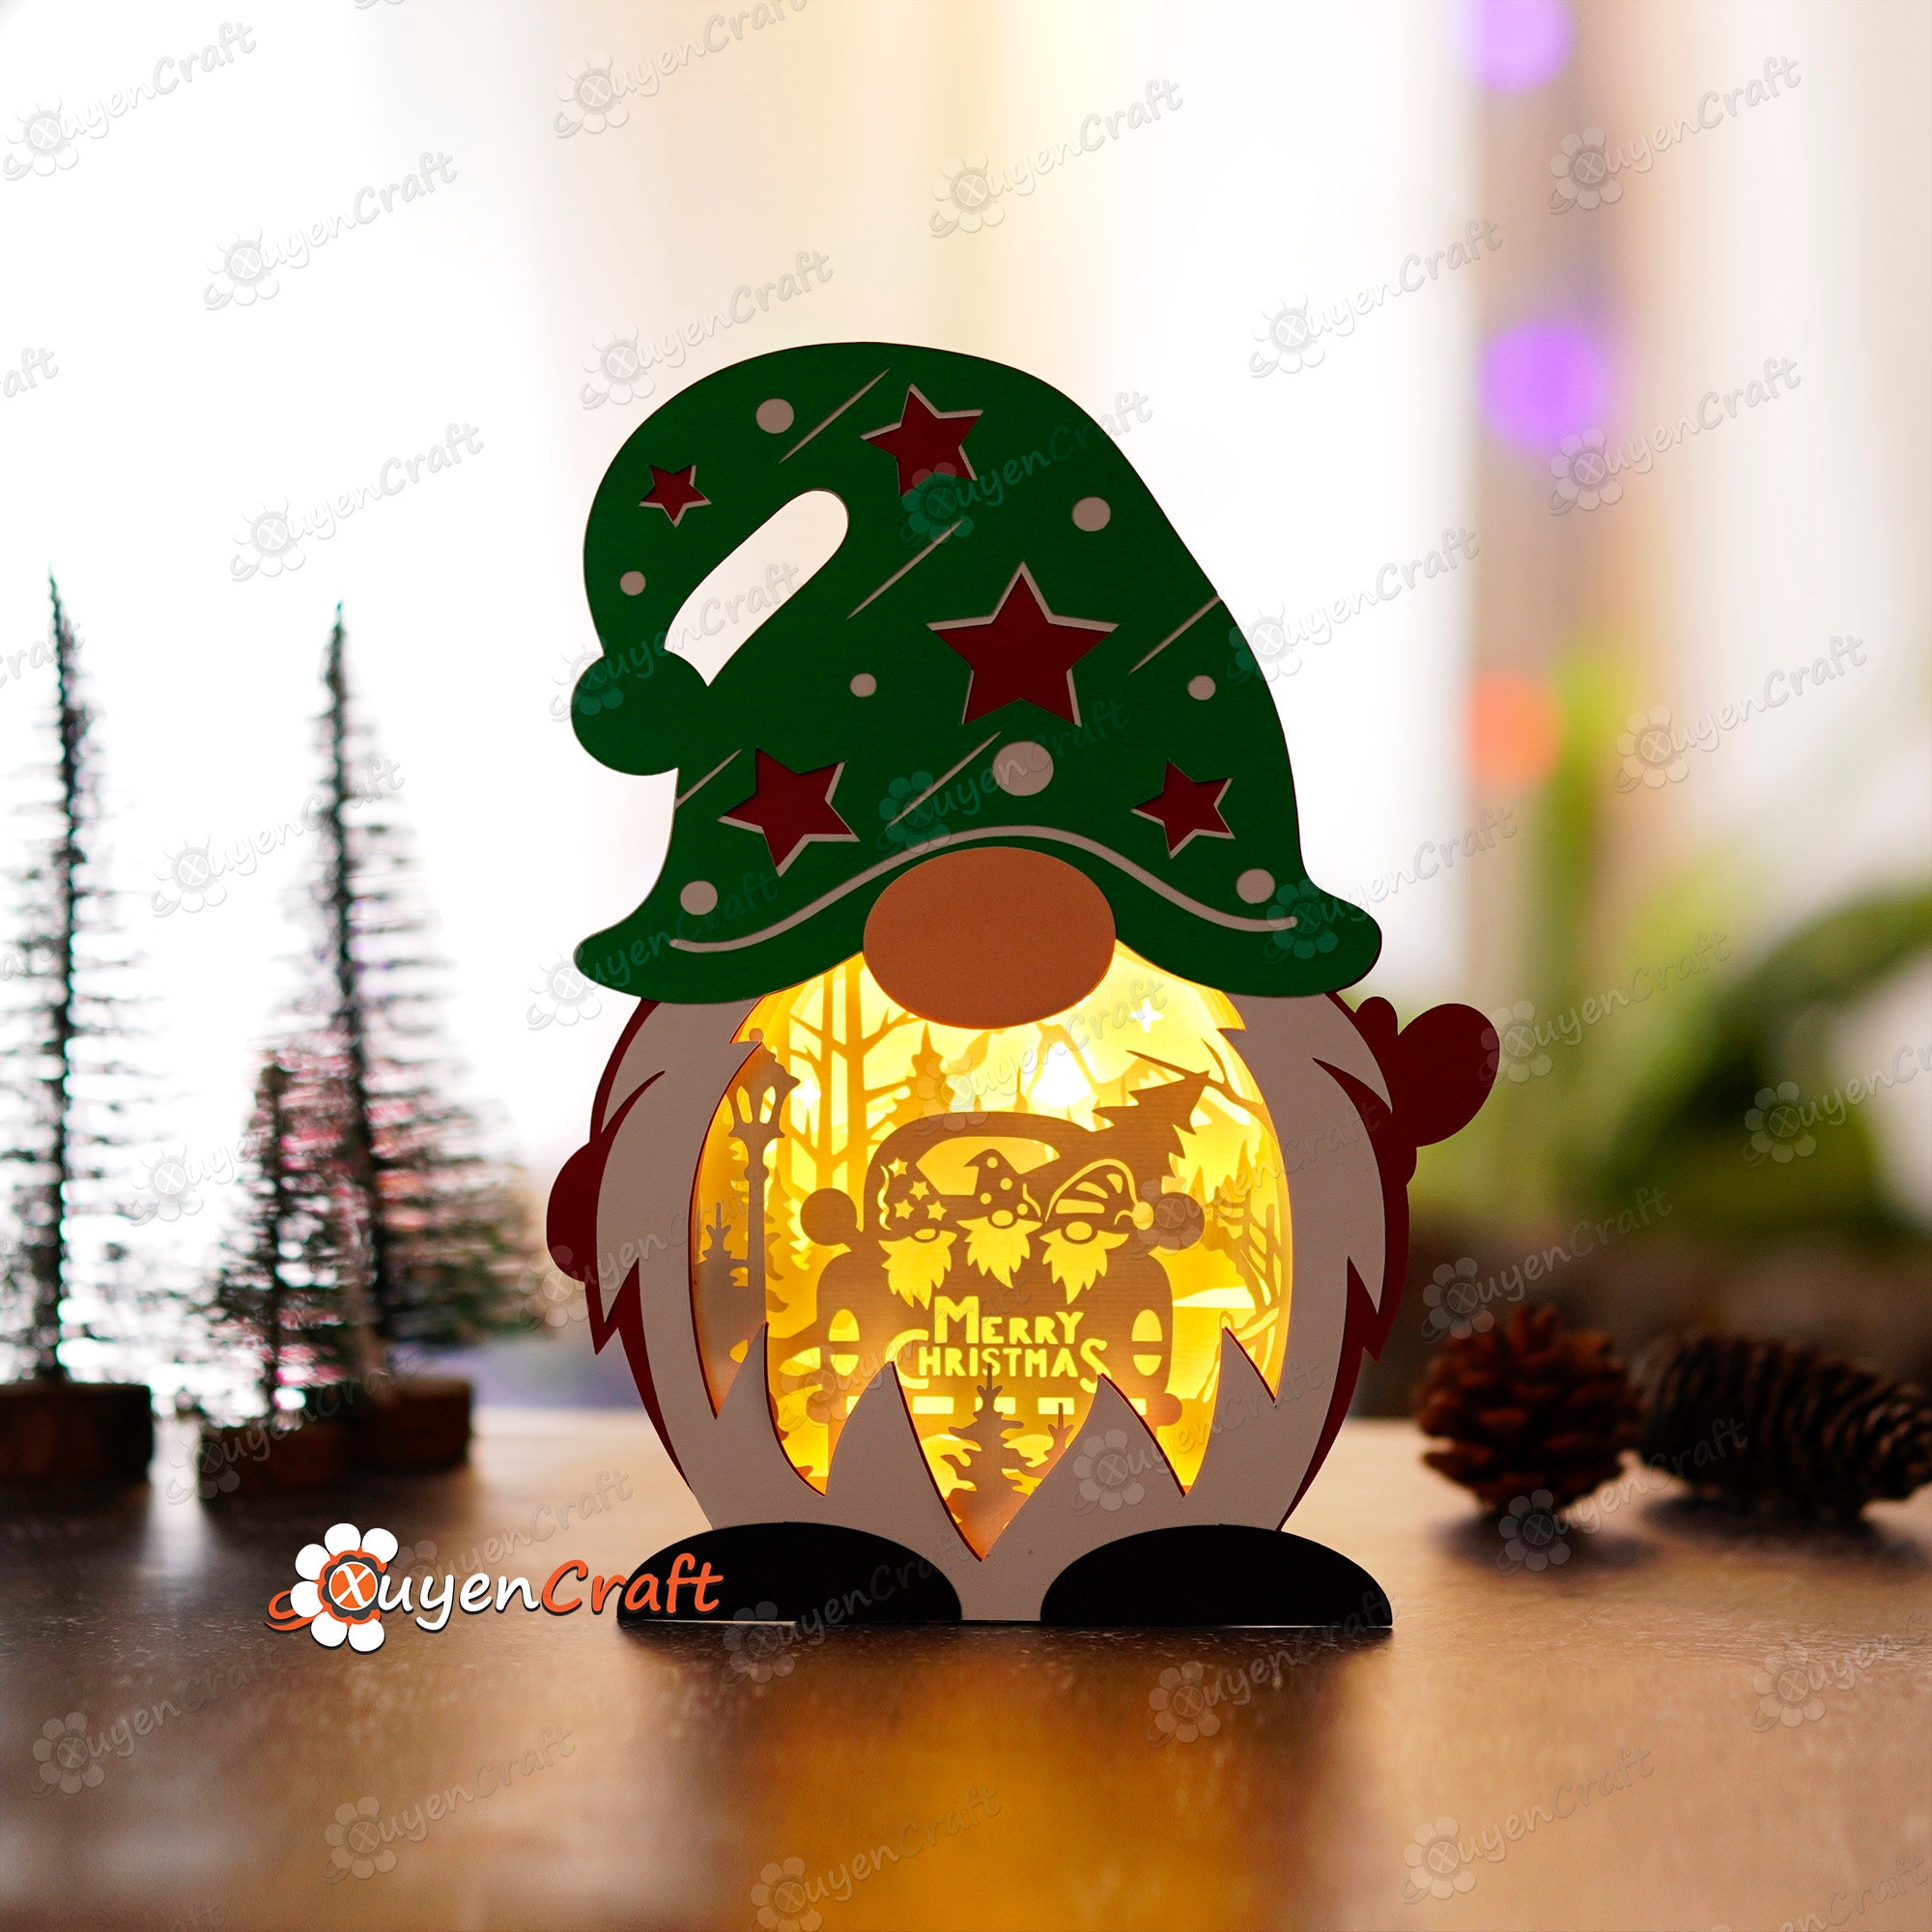 Pack 3 Christmas Gnome Shadow Box PDF, SVG Light Box for Cricut Projects - DIY Gnome Lantern with Christmas Truck, Santa, Deer Scene